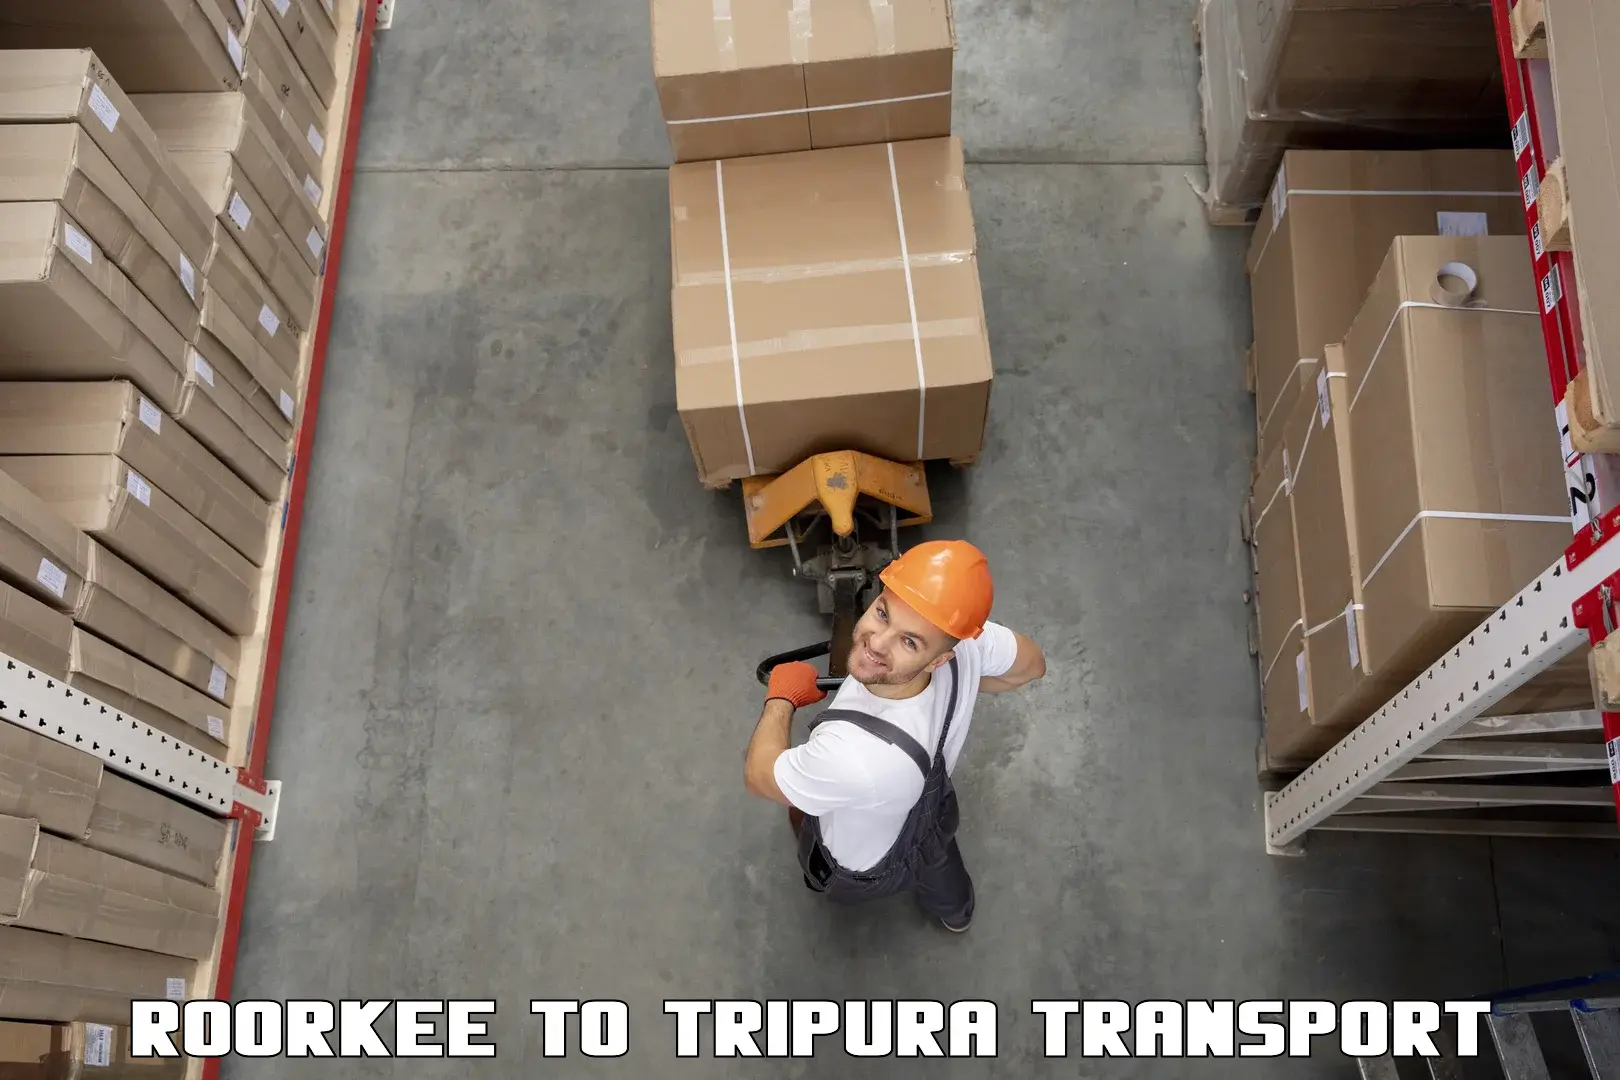 Cargo transport services Roorkee to Udaipur Tripura